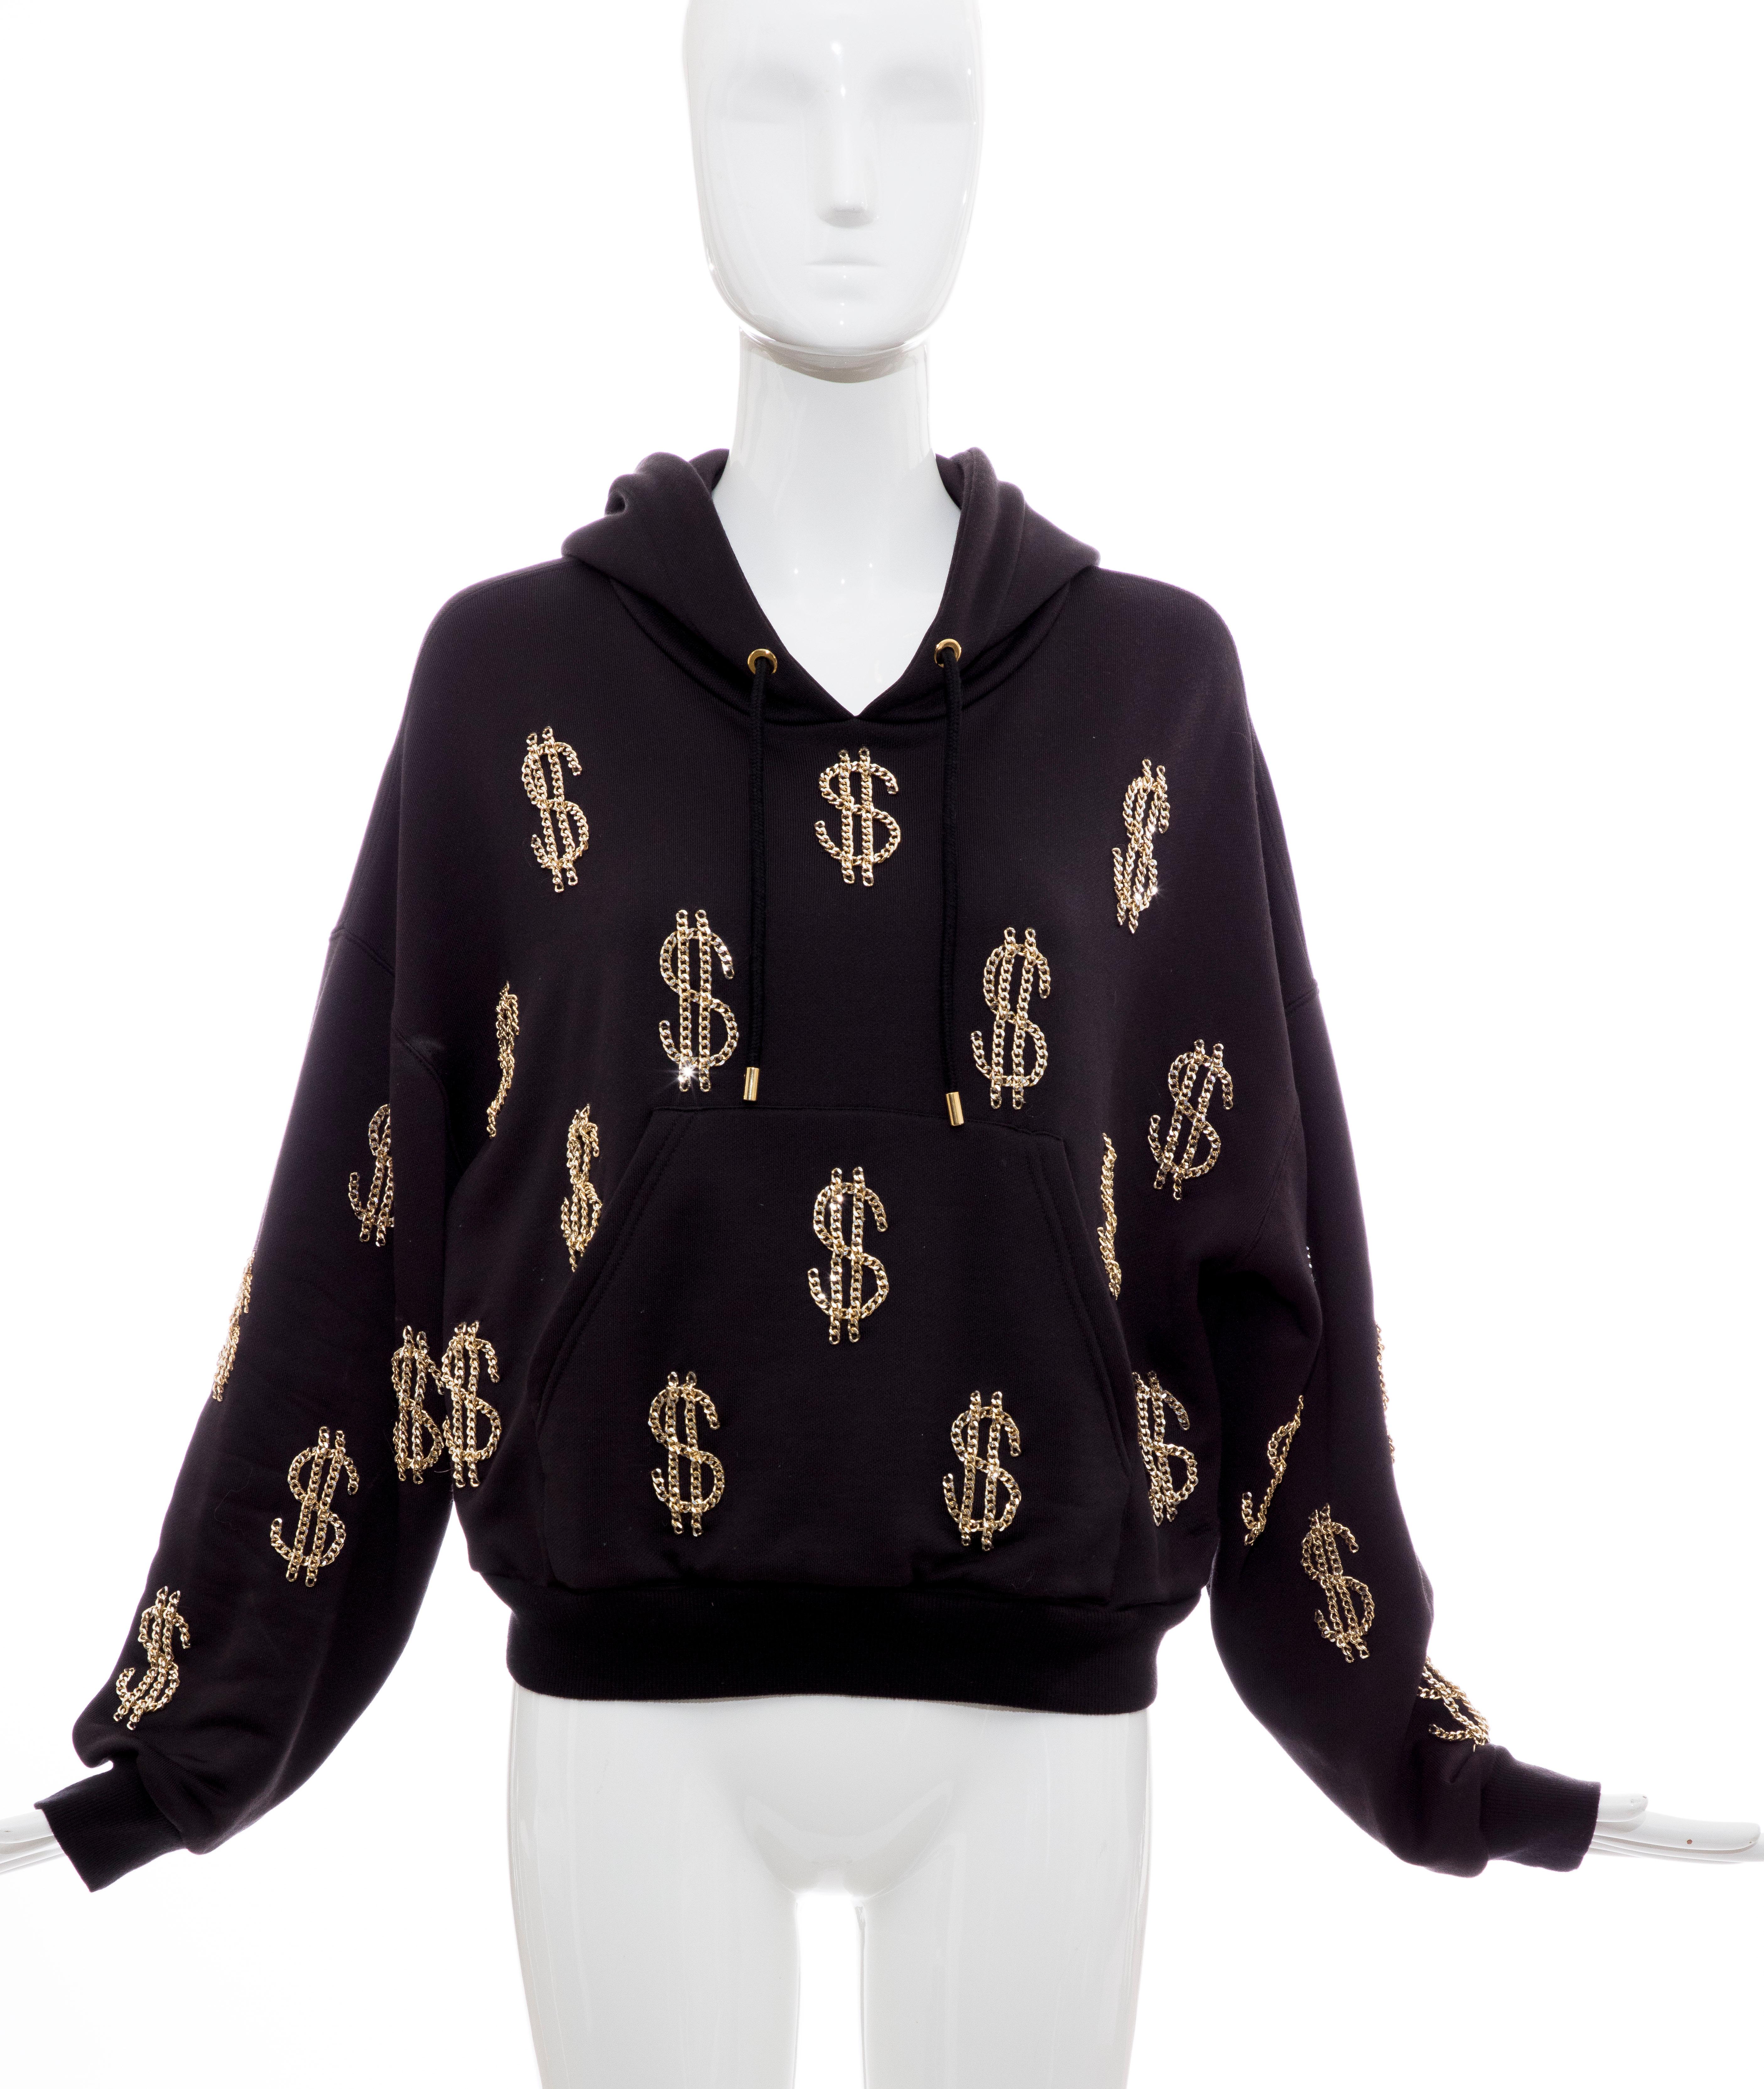 Moschino Couture hoodie with gold-tone chain-link dollar sign appliques throughout, pouch pocket at front and draw string at hood.

Bust 46”, Waist 36”, Length 21”